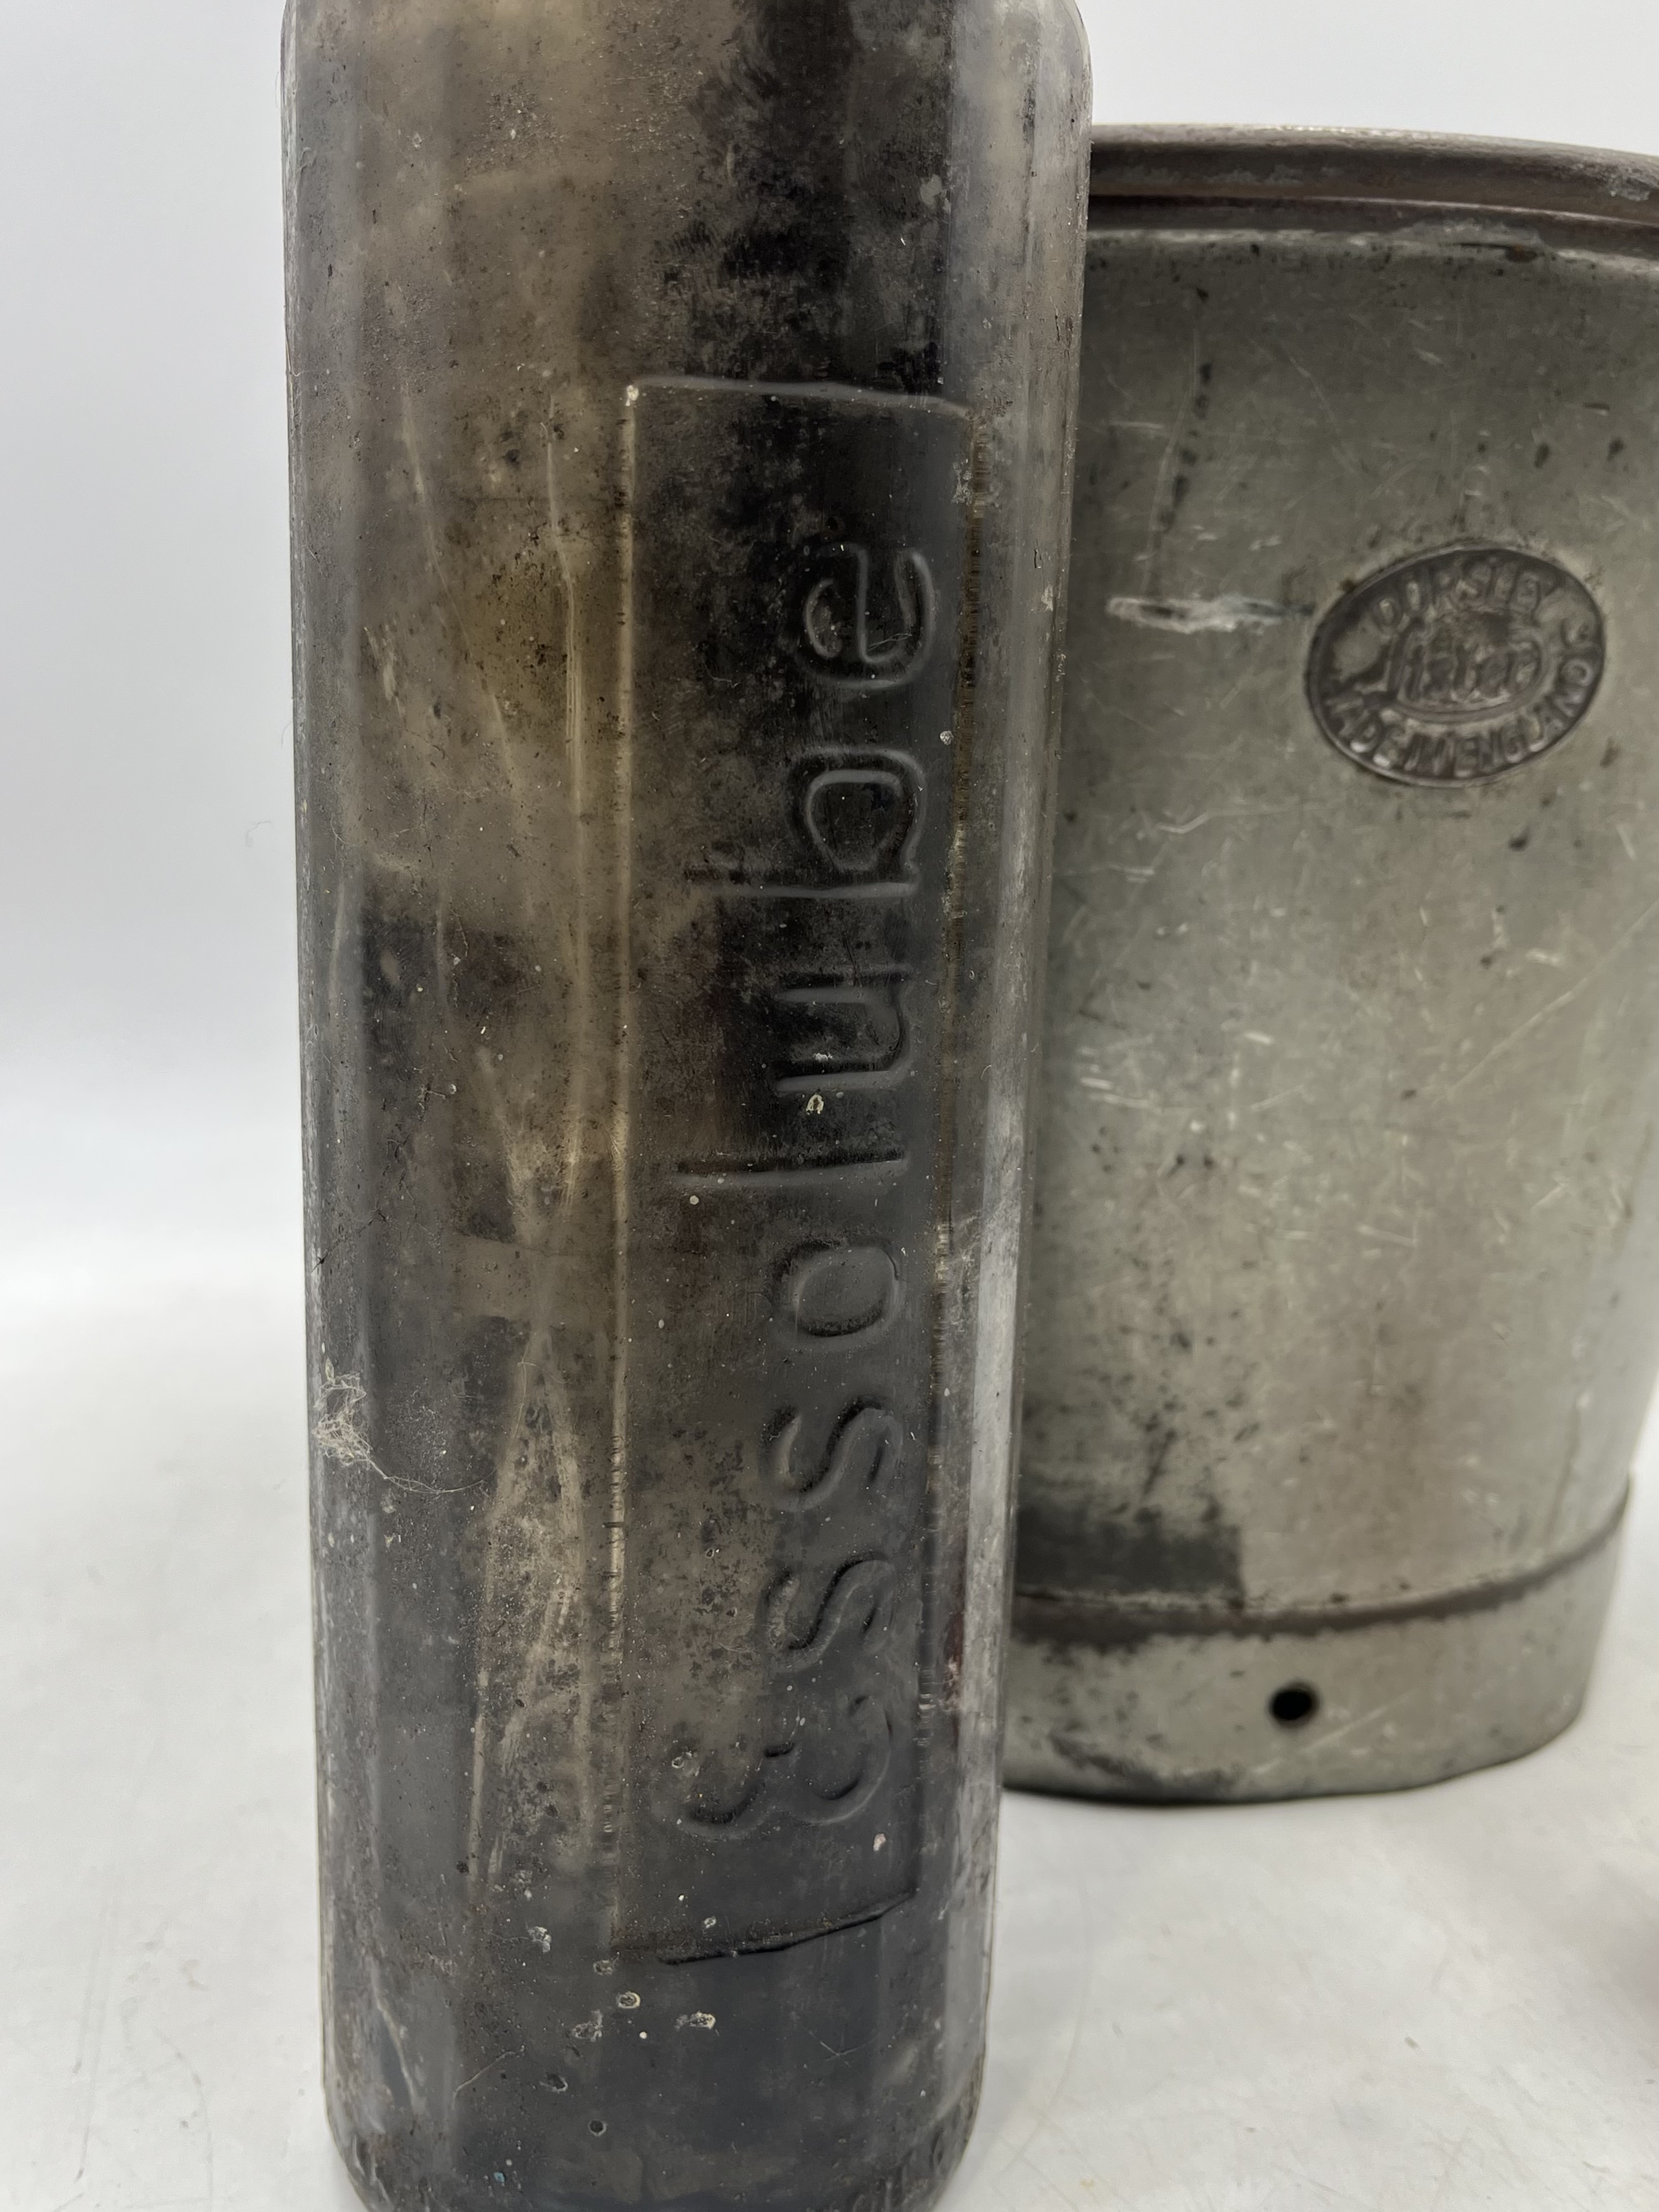 A galvanised Lister bucket along with a Castrol Motor Oil bottle and an Esso lube bottle. - Image 4 of 8